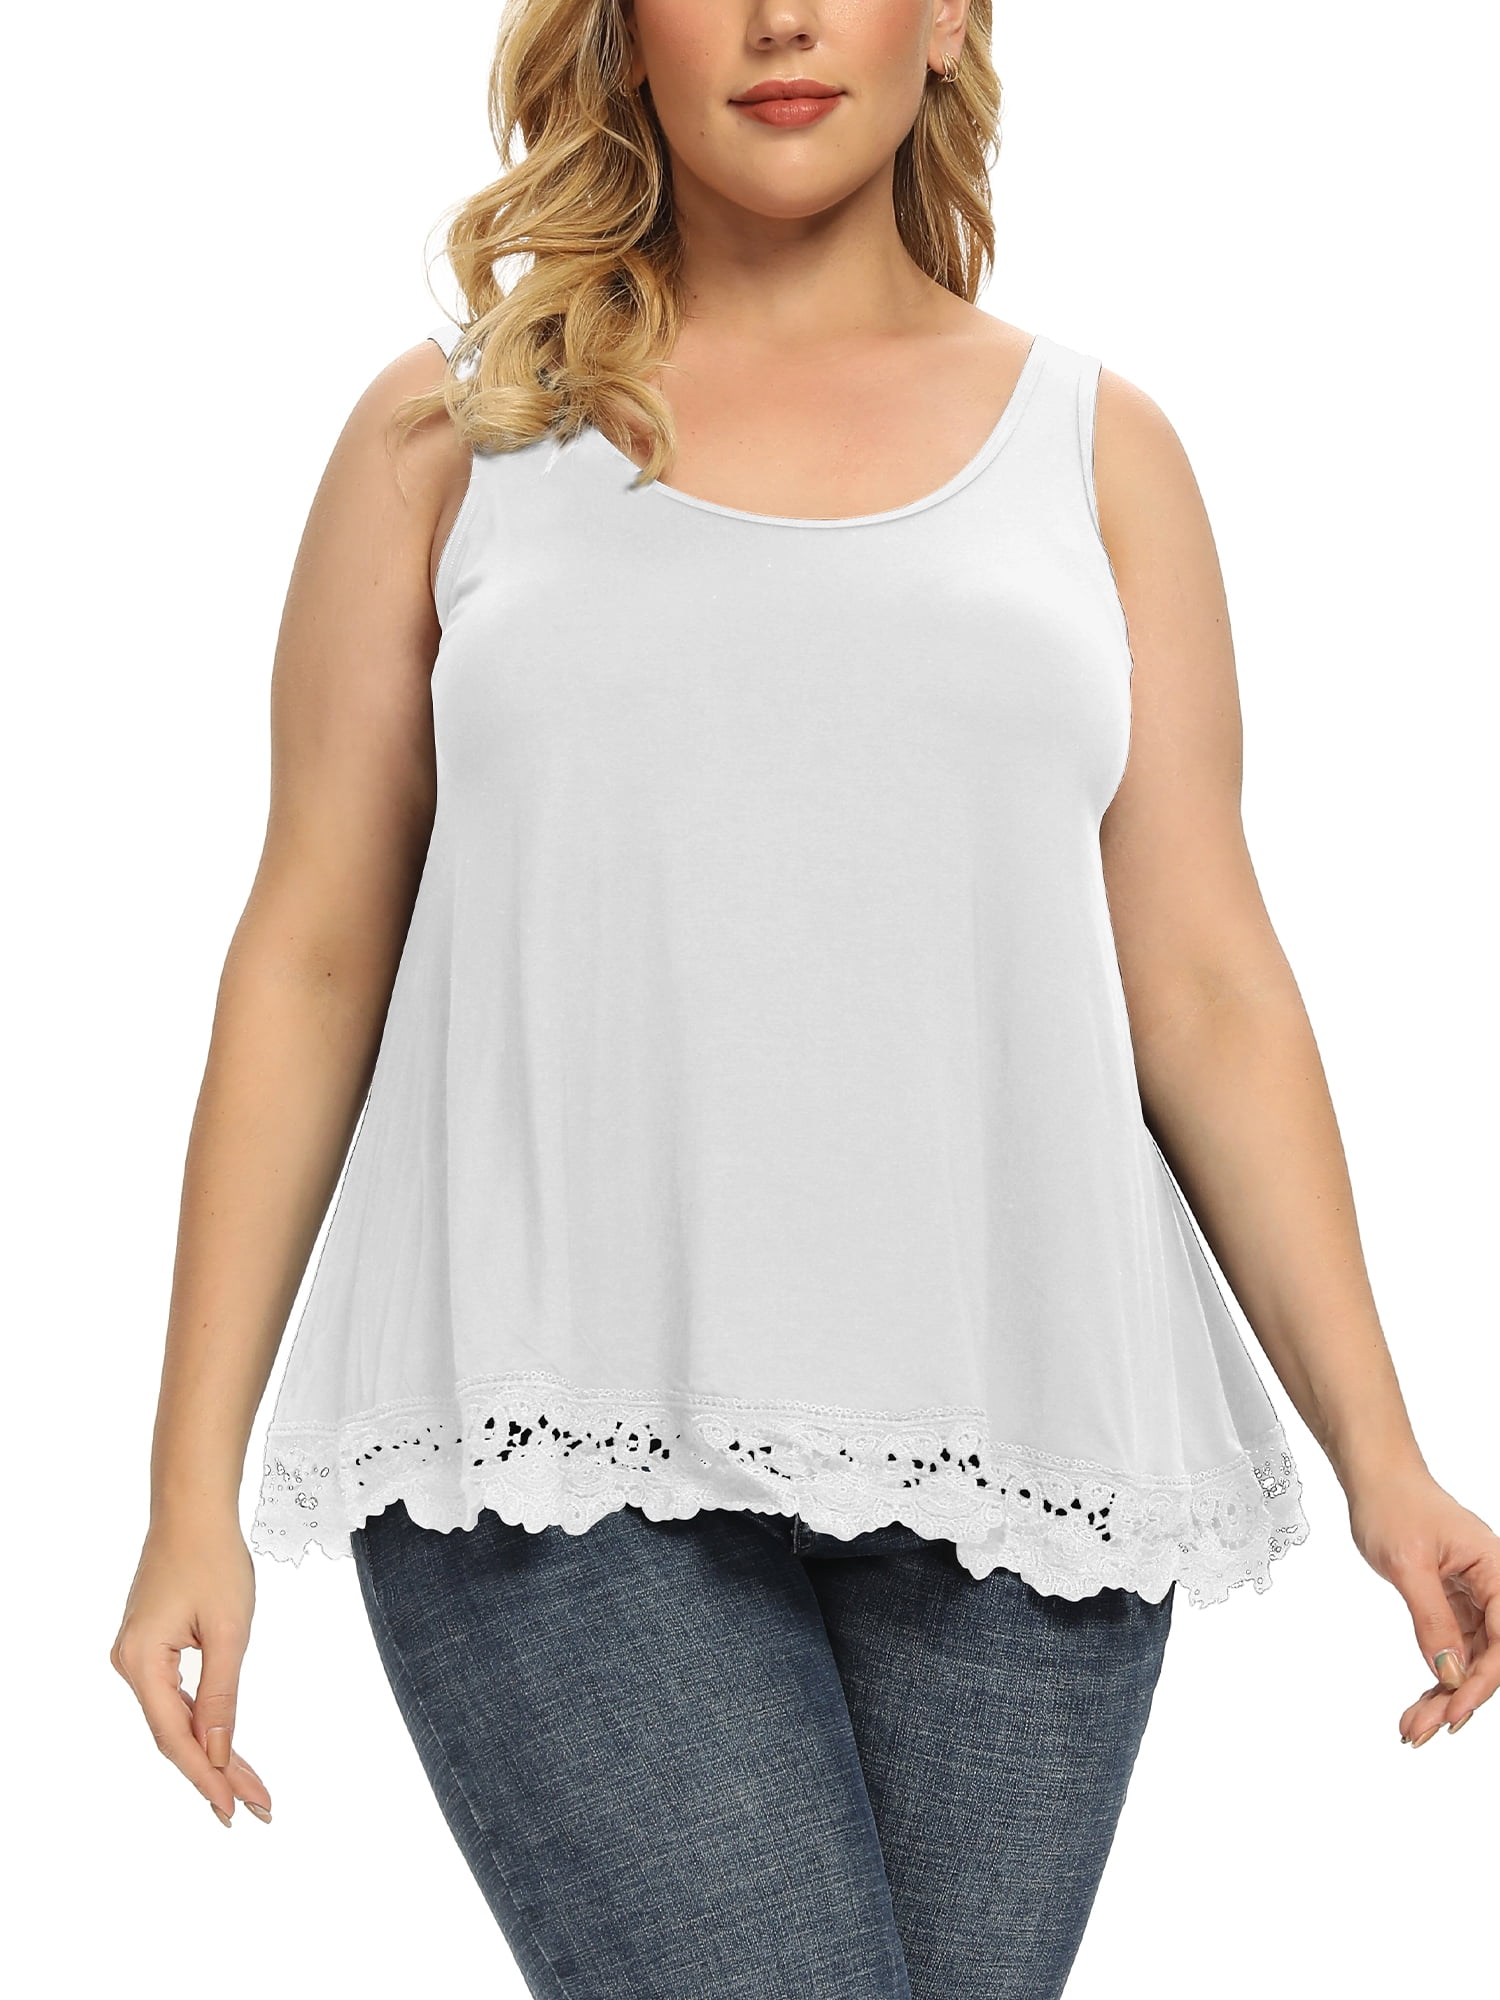 COMFREE Womens Camisole with Built in Bra Plus Size Palestine